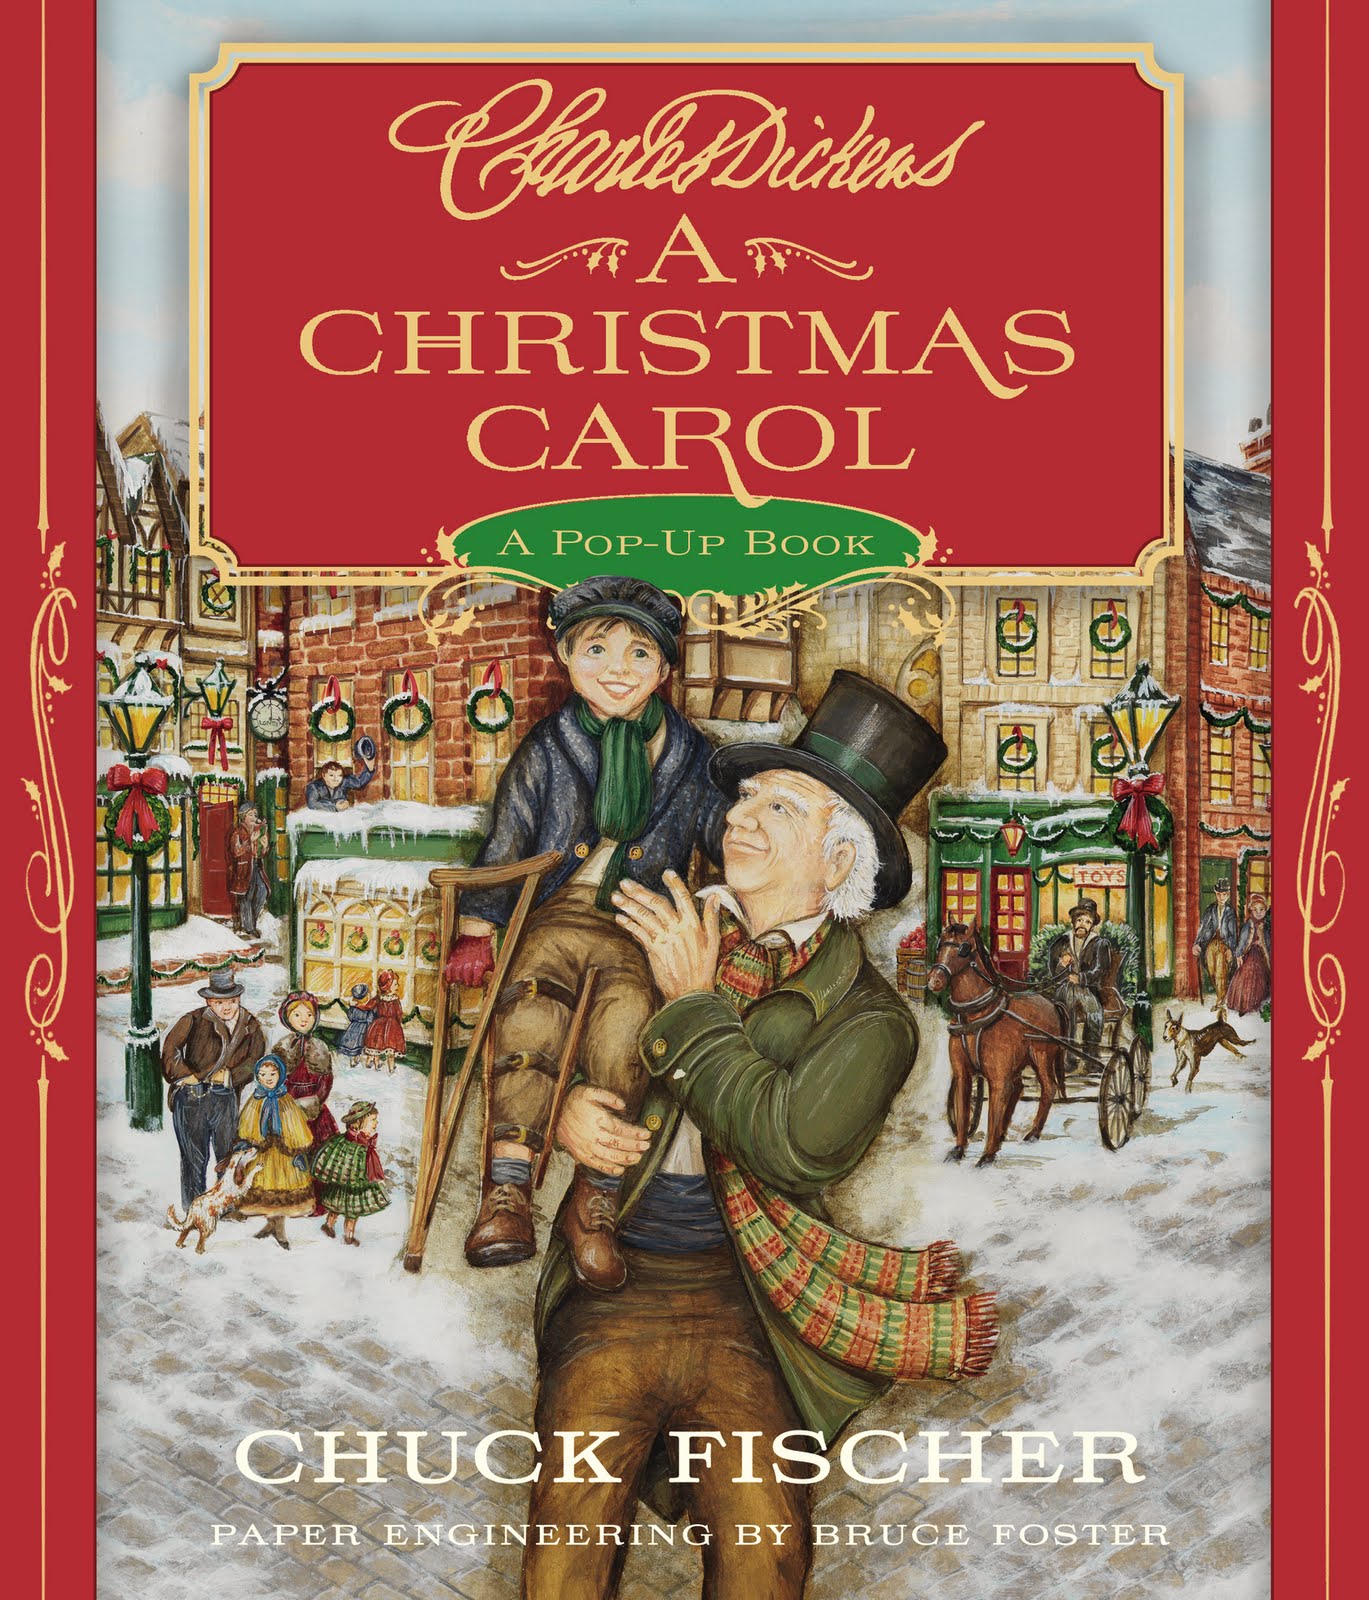 Wordsmithonia: Charles Dicken's A Christmas Carol: A Pop-Up Book by Chuck Fischer